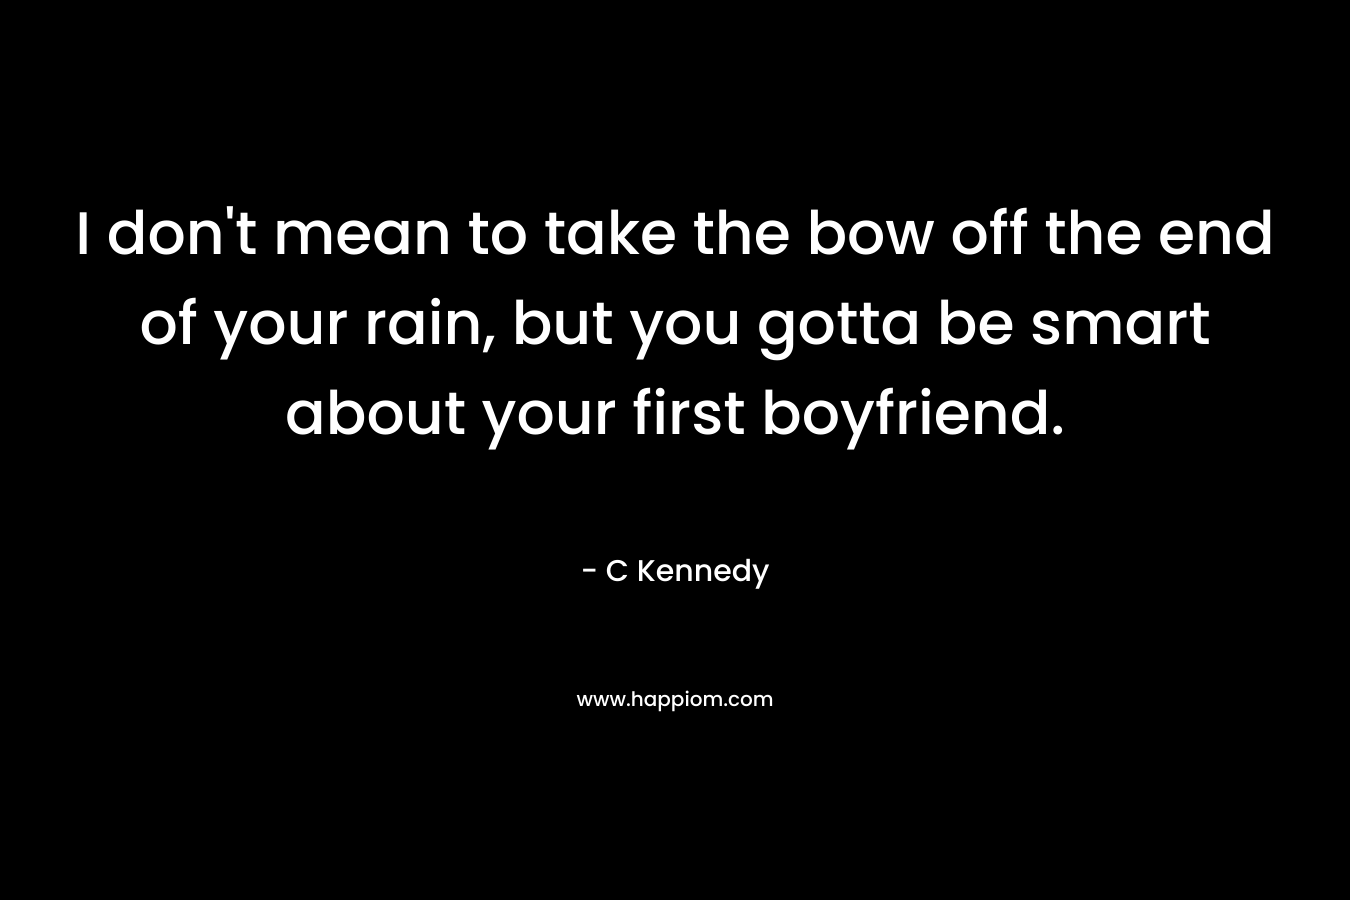 I don’t mean to take the bow off the end of your rain, but you gotta be smart about your first boyfriend. – C Kennedy